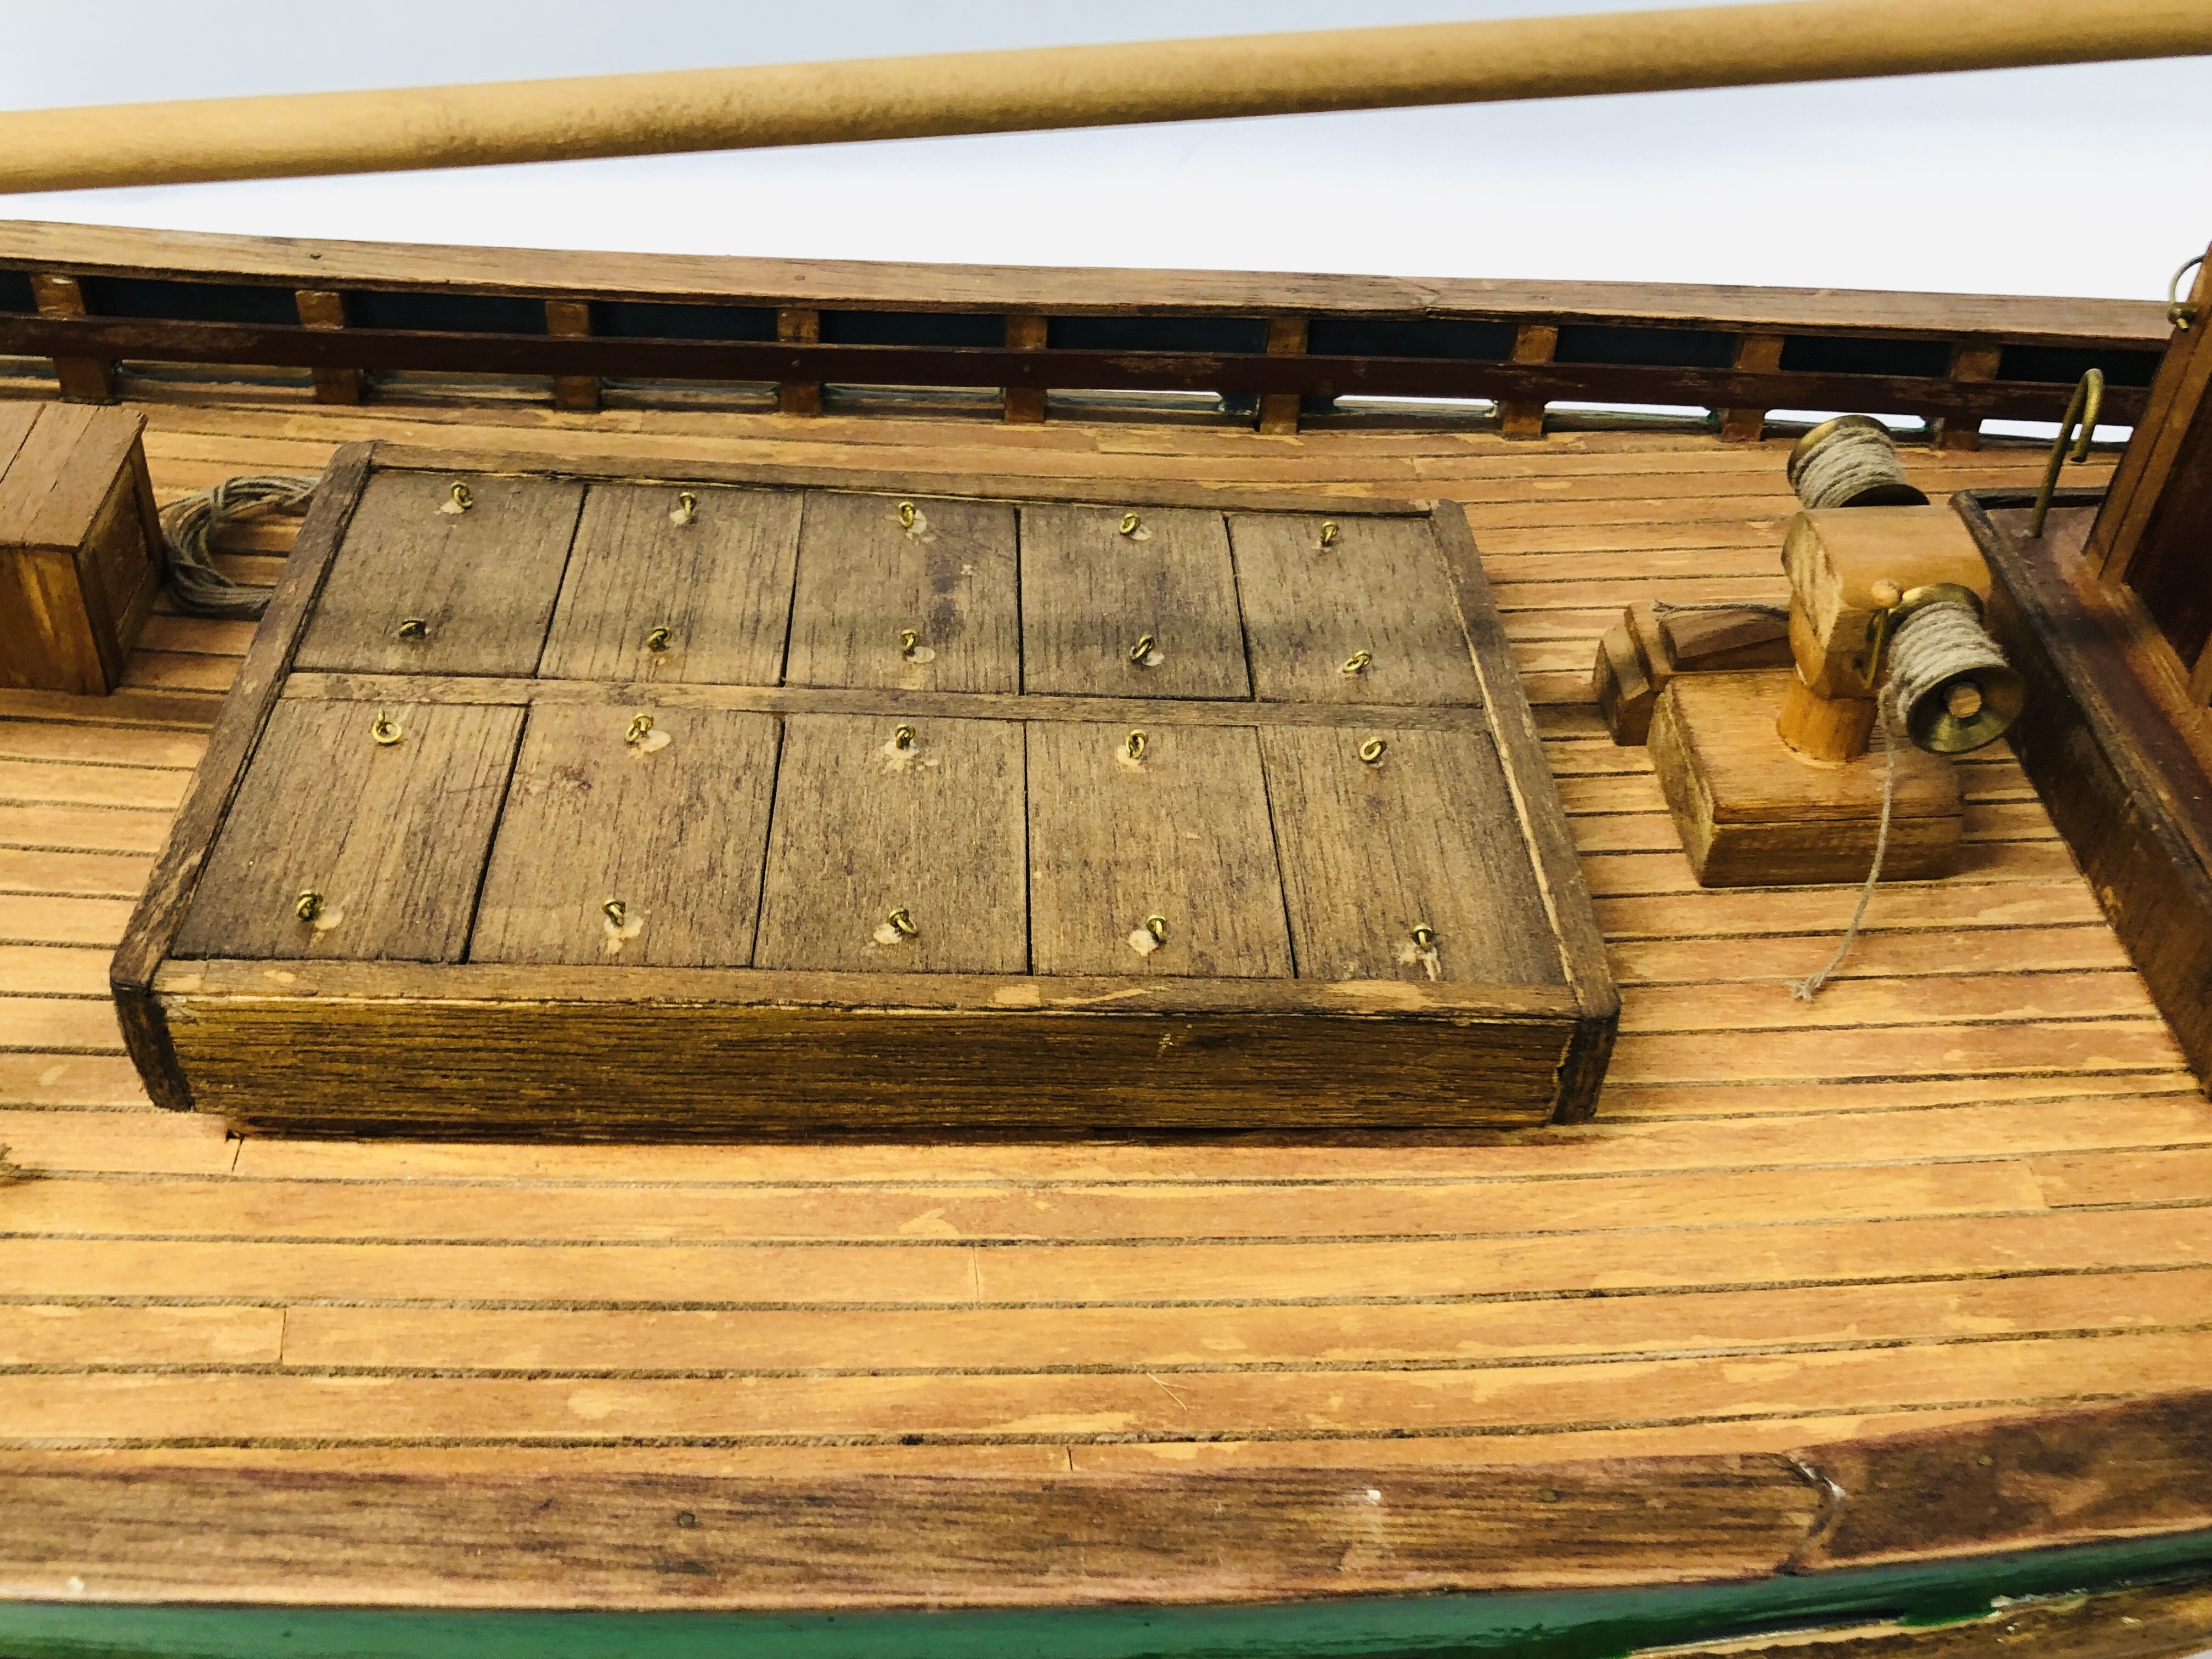 A VINTAGE HAND BUILT WOODEN MODEL OF A FISHING TRAWLER "EILEEN" NO. 96 LENGTH 85CM. HEIGHT 66CM. - Image 7 of 11